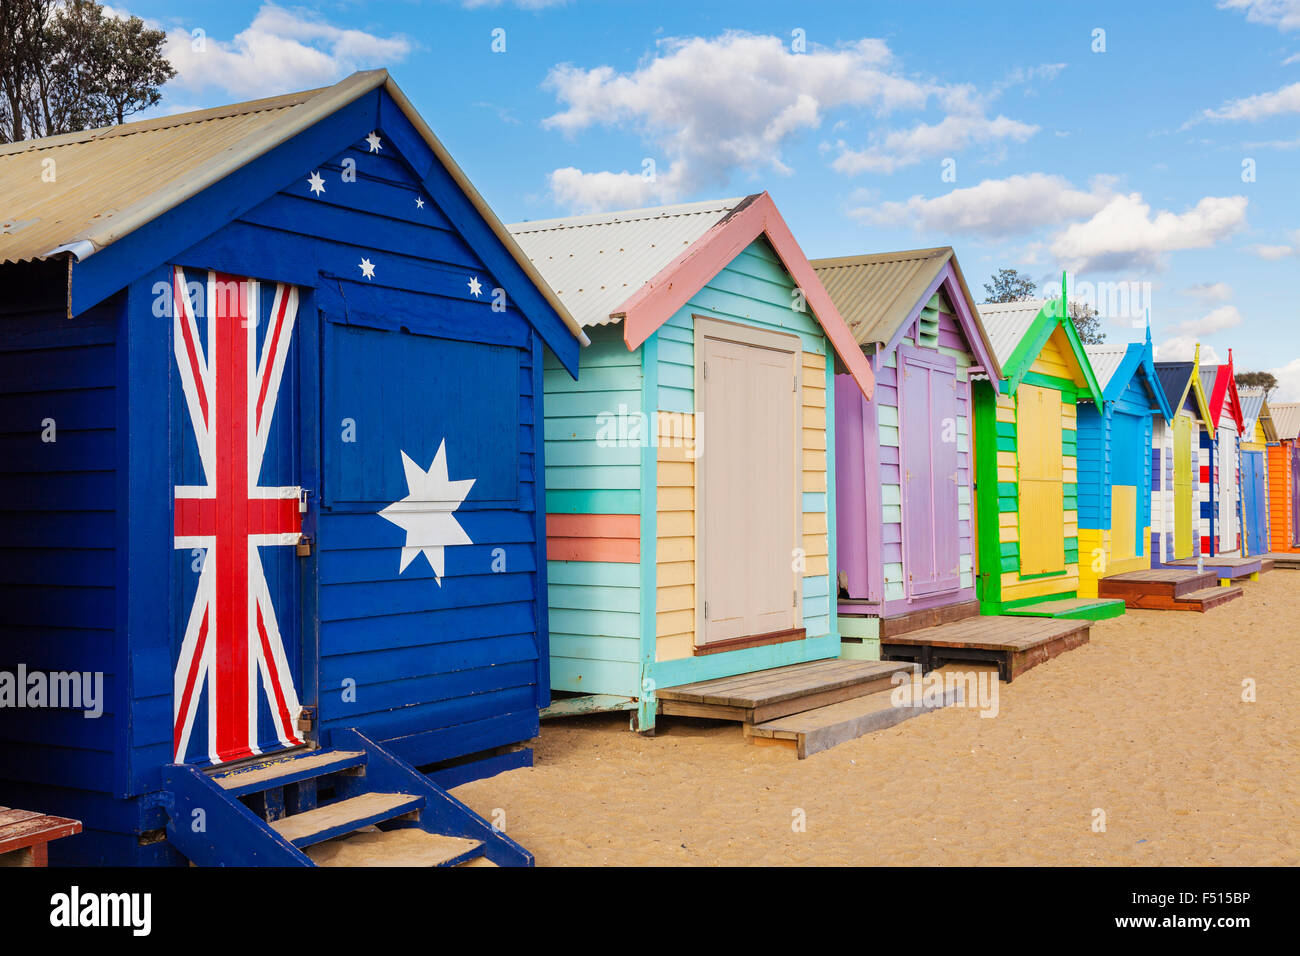 Bathing boxes in a beach with copyspace Stock Photo